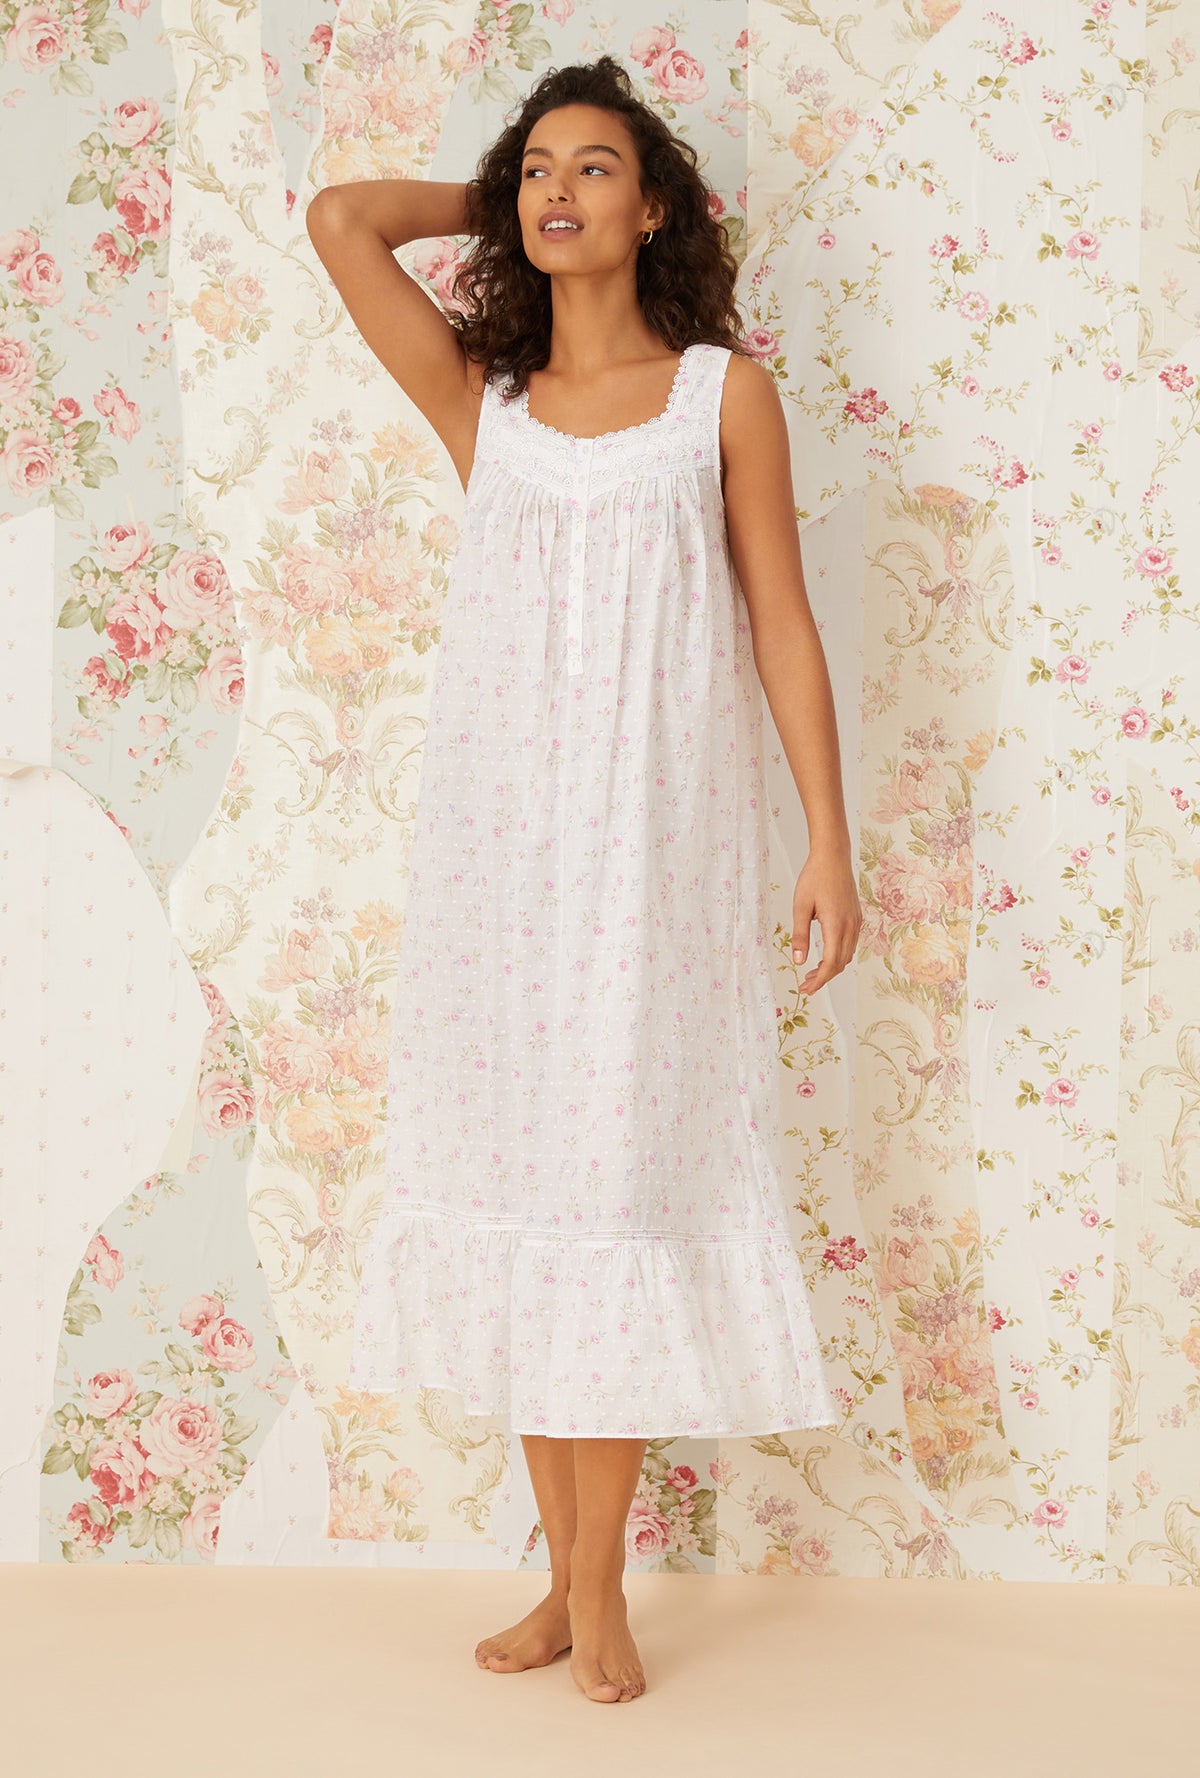 Lovely Floral Swiss Dot Ballet Nightgown